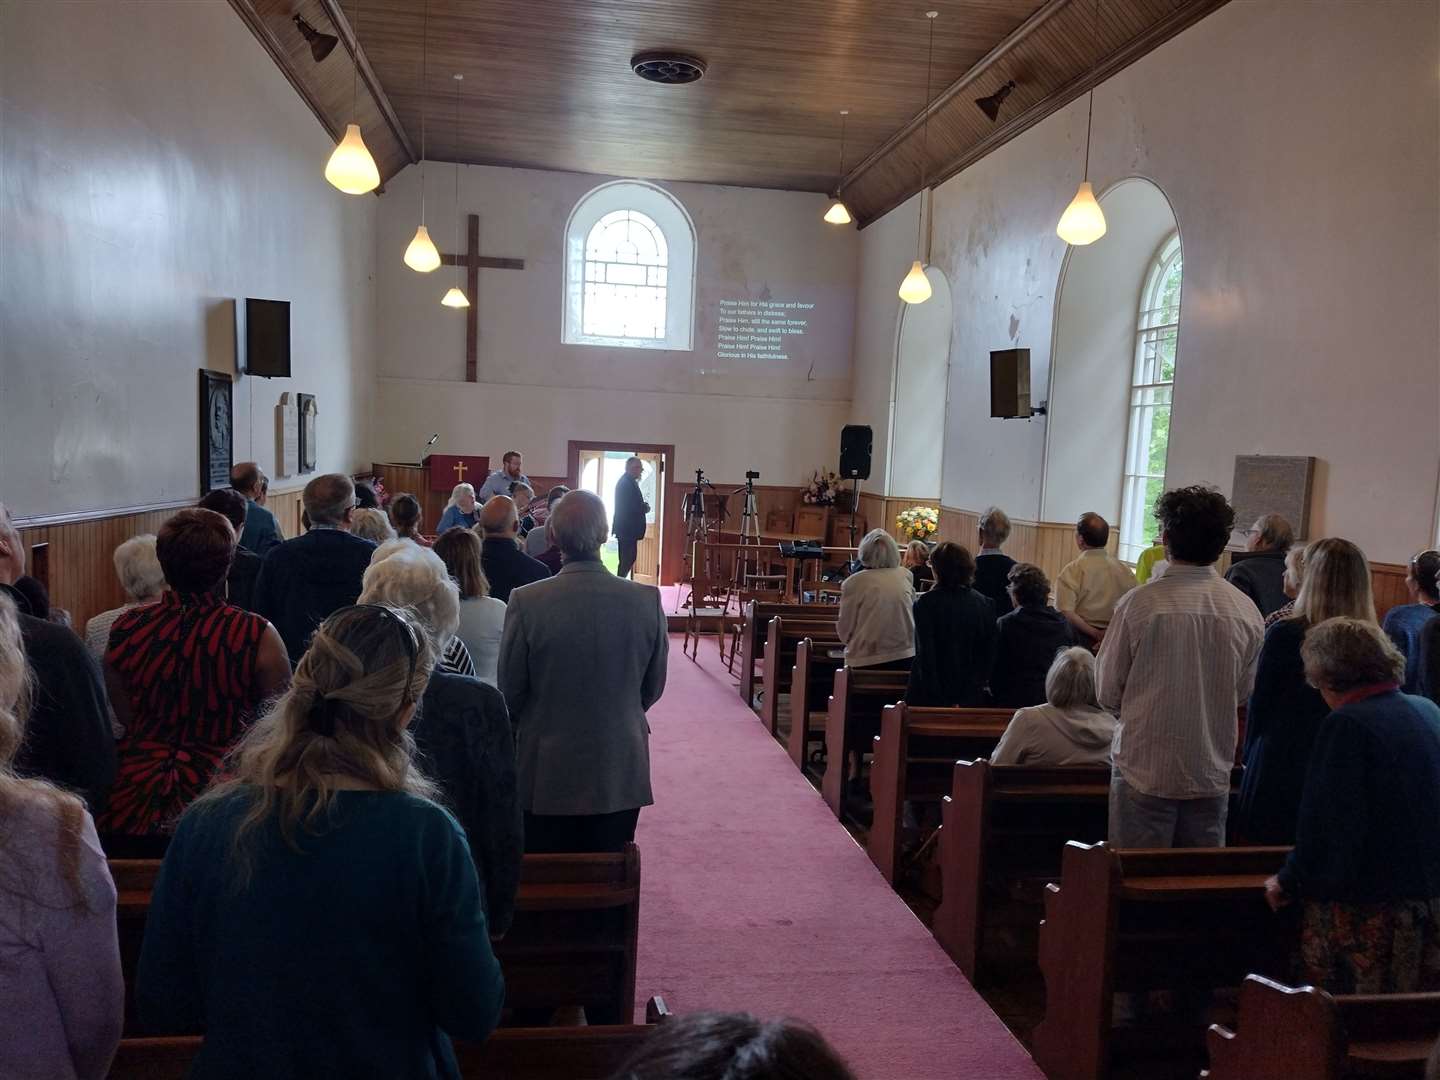 The last congregation: this morning's service at Alvie Church was well attended